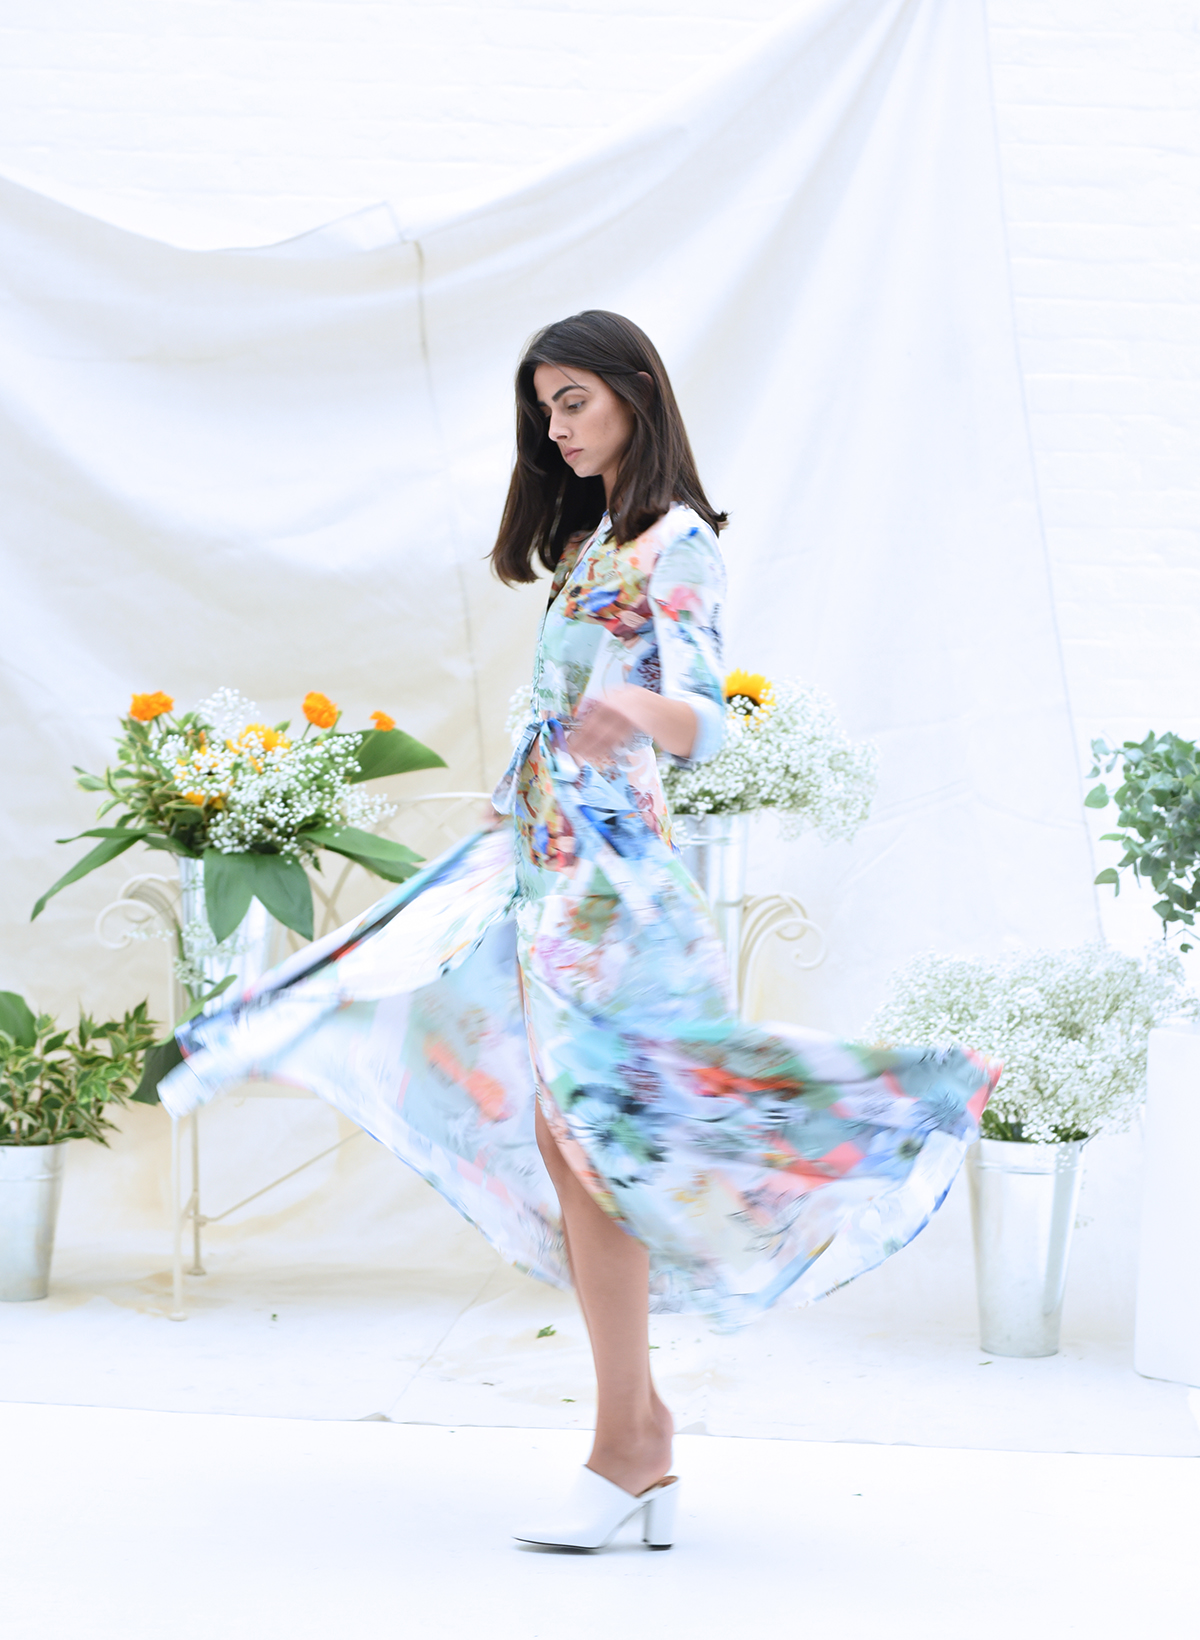 Model spins in a floral print dress with bouquets of flowers behind her